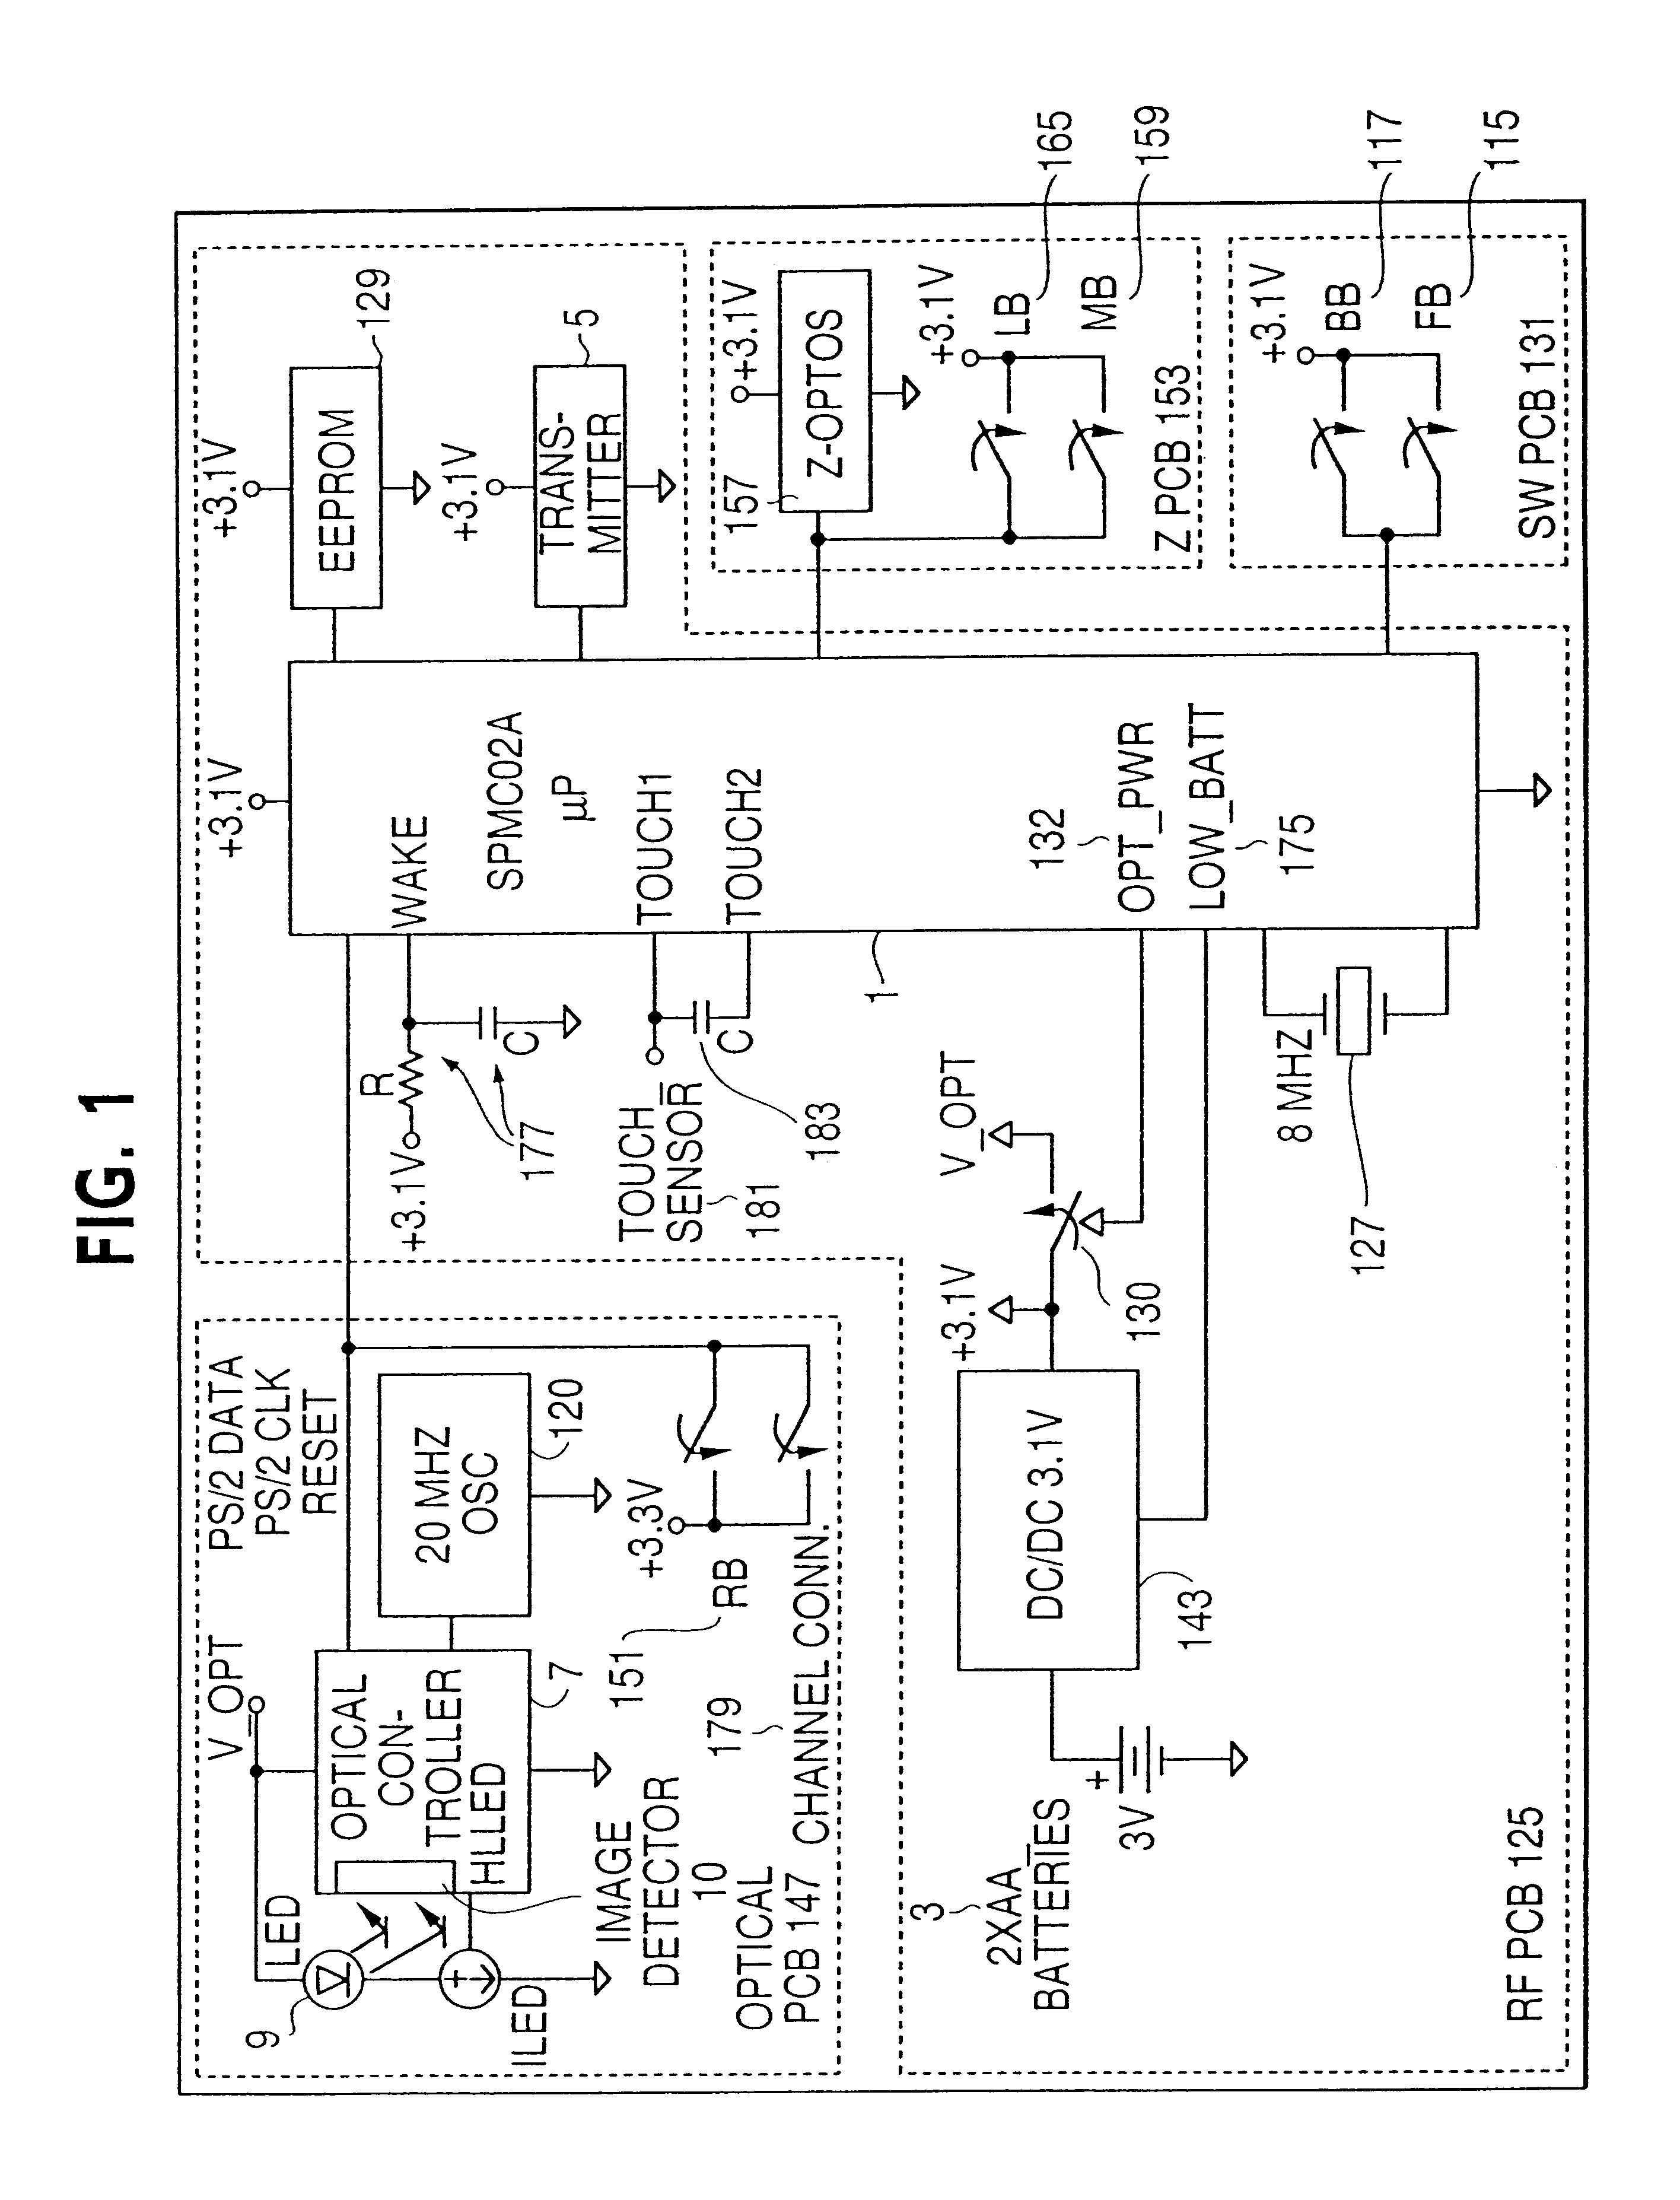 Capacitive sensing and data input device power management